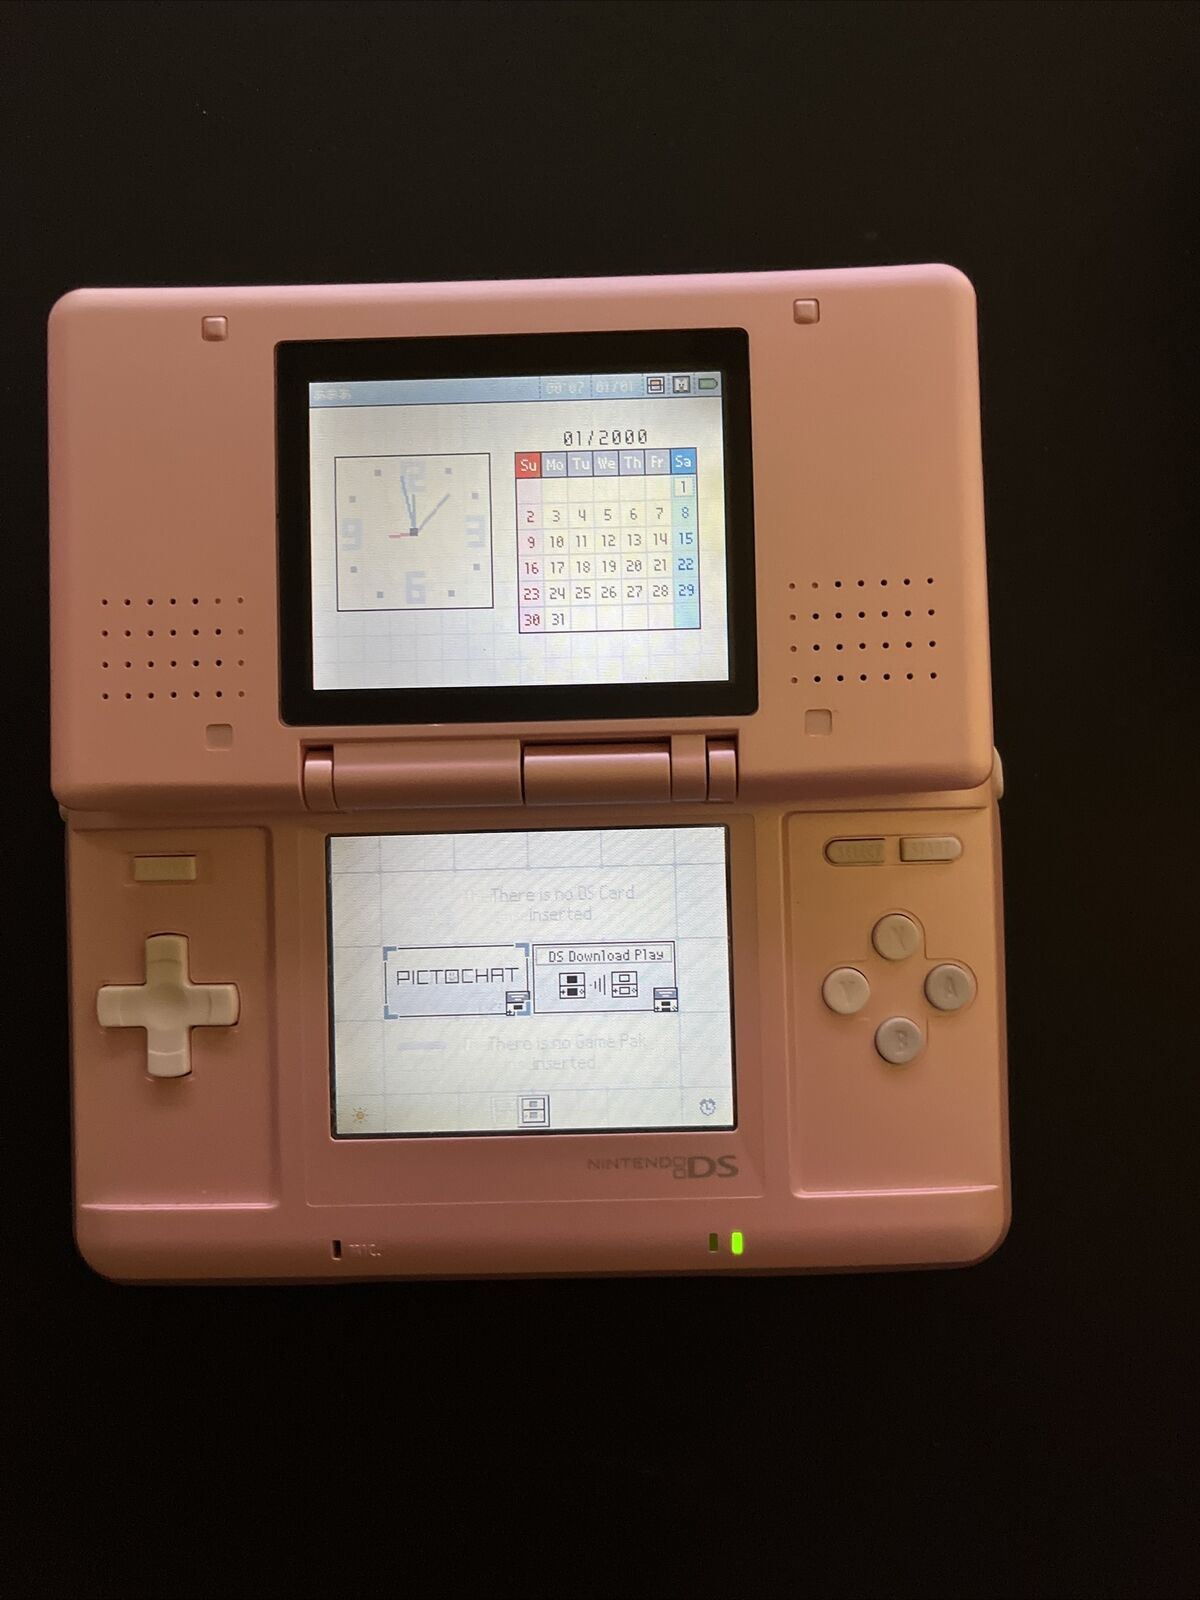 Nintendo DS Original Console Pink Boxed Complete with USB Charger